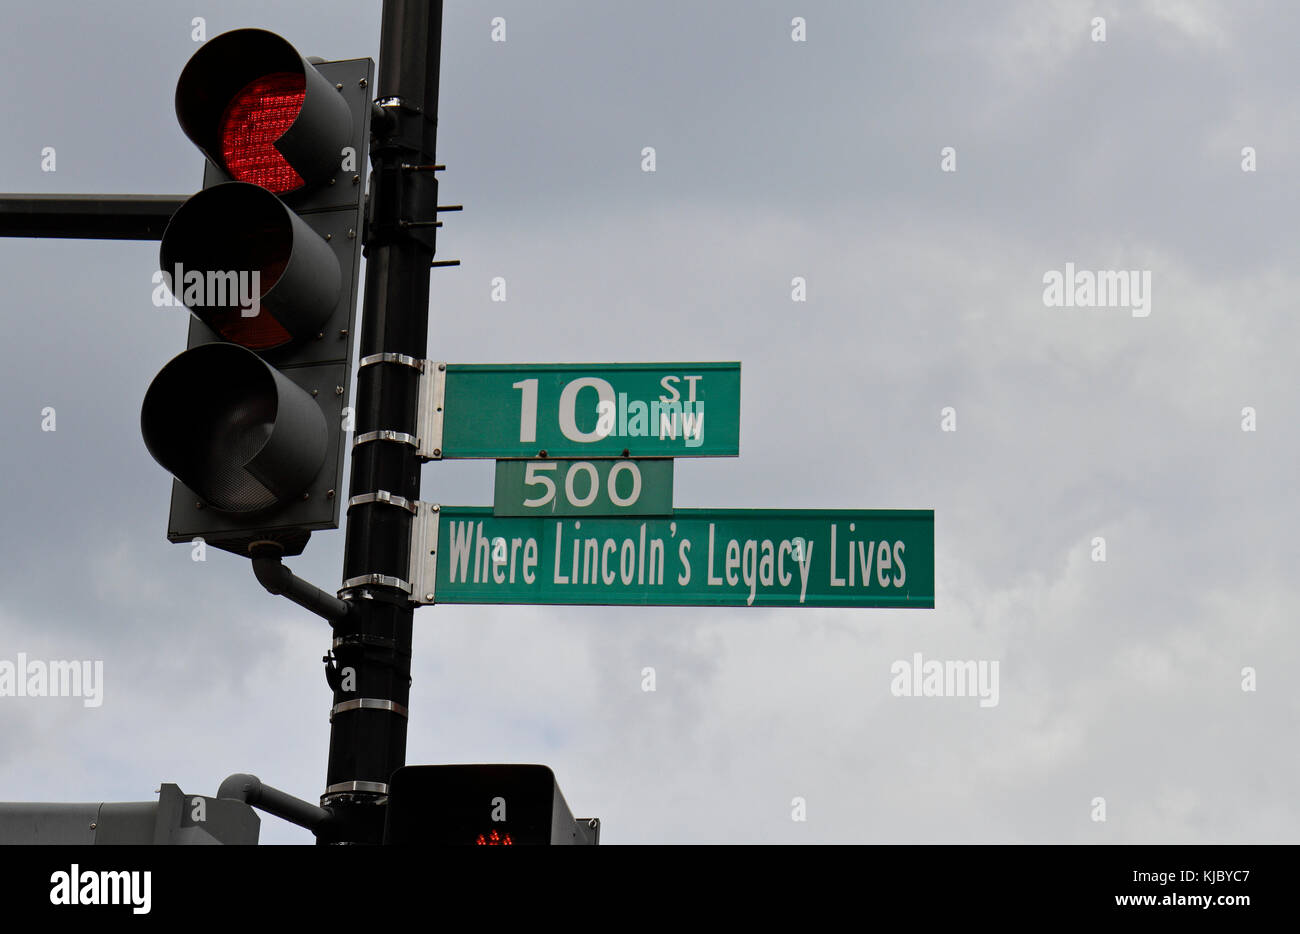 Lincoln commemorative street sign am 10 ST NW, Washington DC, USA, die Adresse von Ford's Theater.. Stockfoto